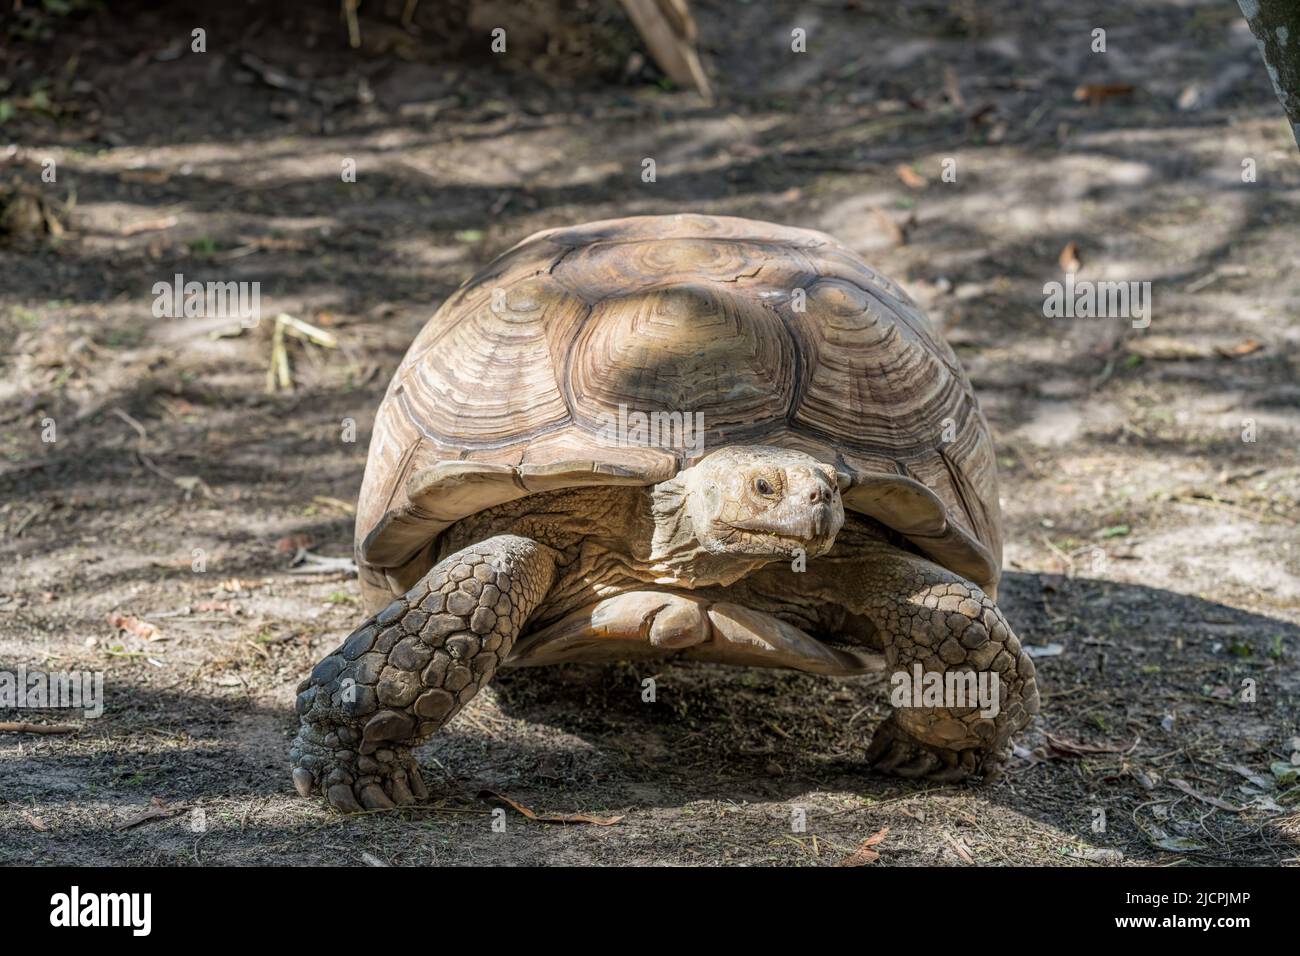 African Spurred Tortoise or Sulcata Tortoise, Centrochelyx sulcata, in the South Padre Island Birding & Nature Center, Texas. Stock Photo